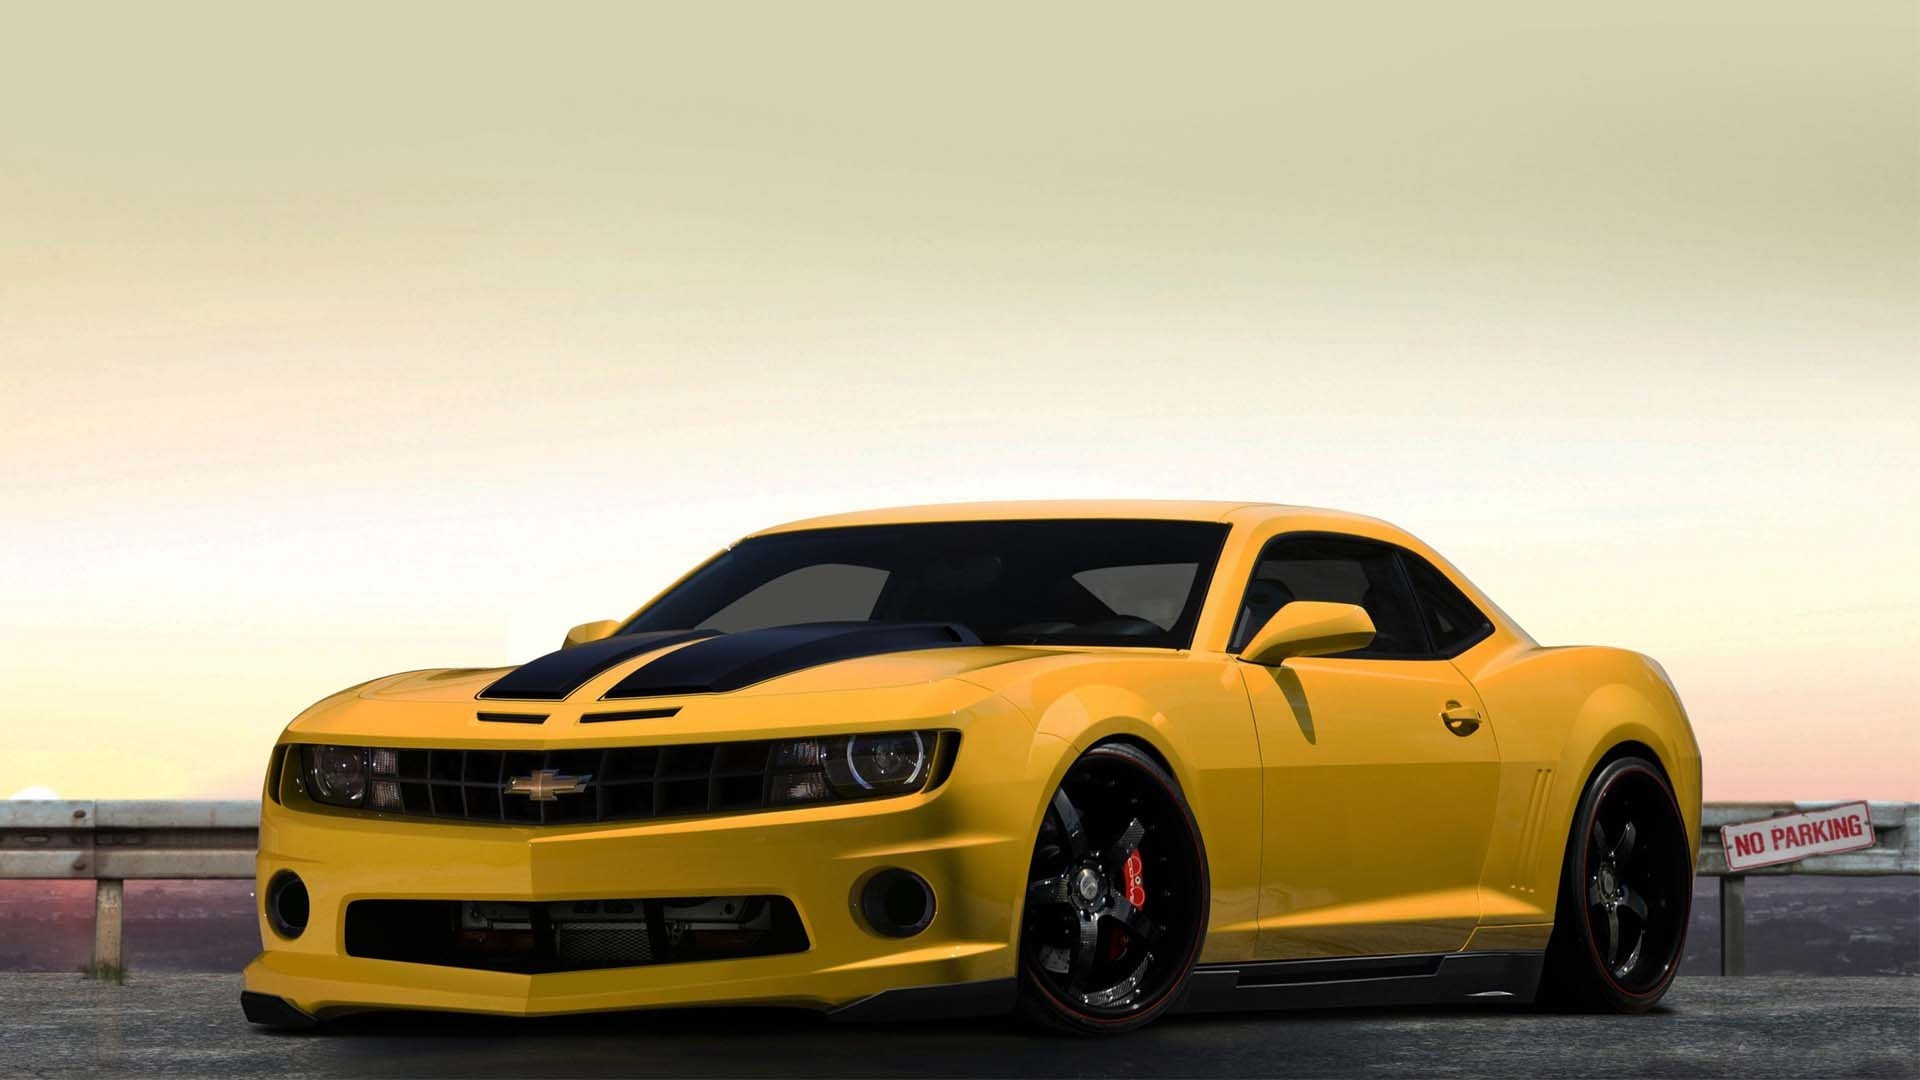 General 1920x1080 Chevrolet Camaro Chevrolet yellow cars car vehicle muscle cars American cars